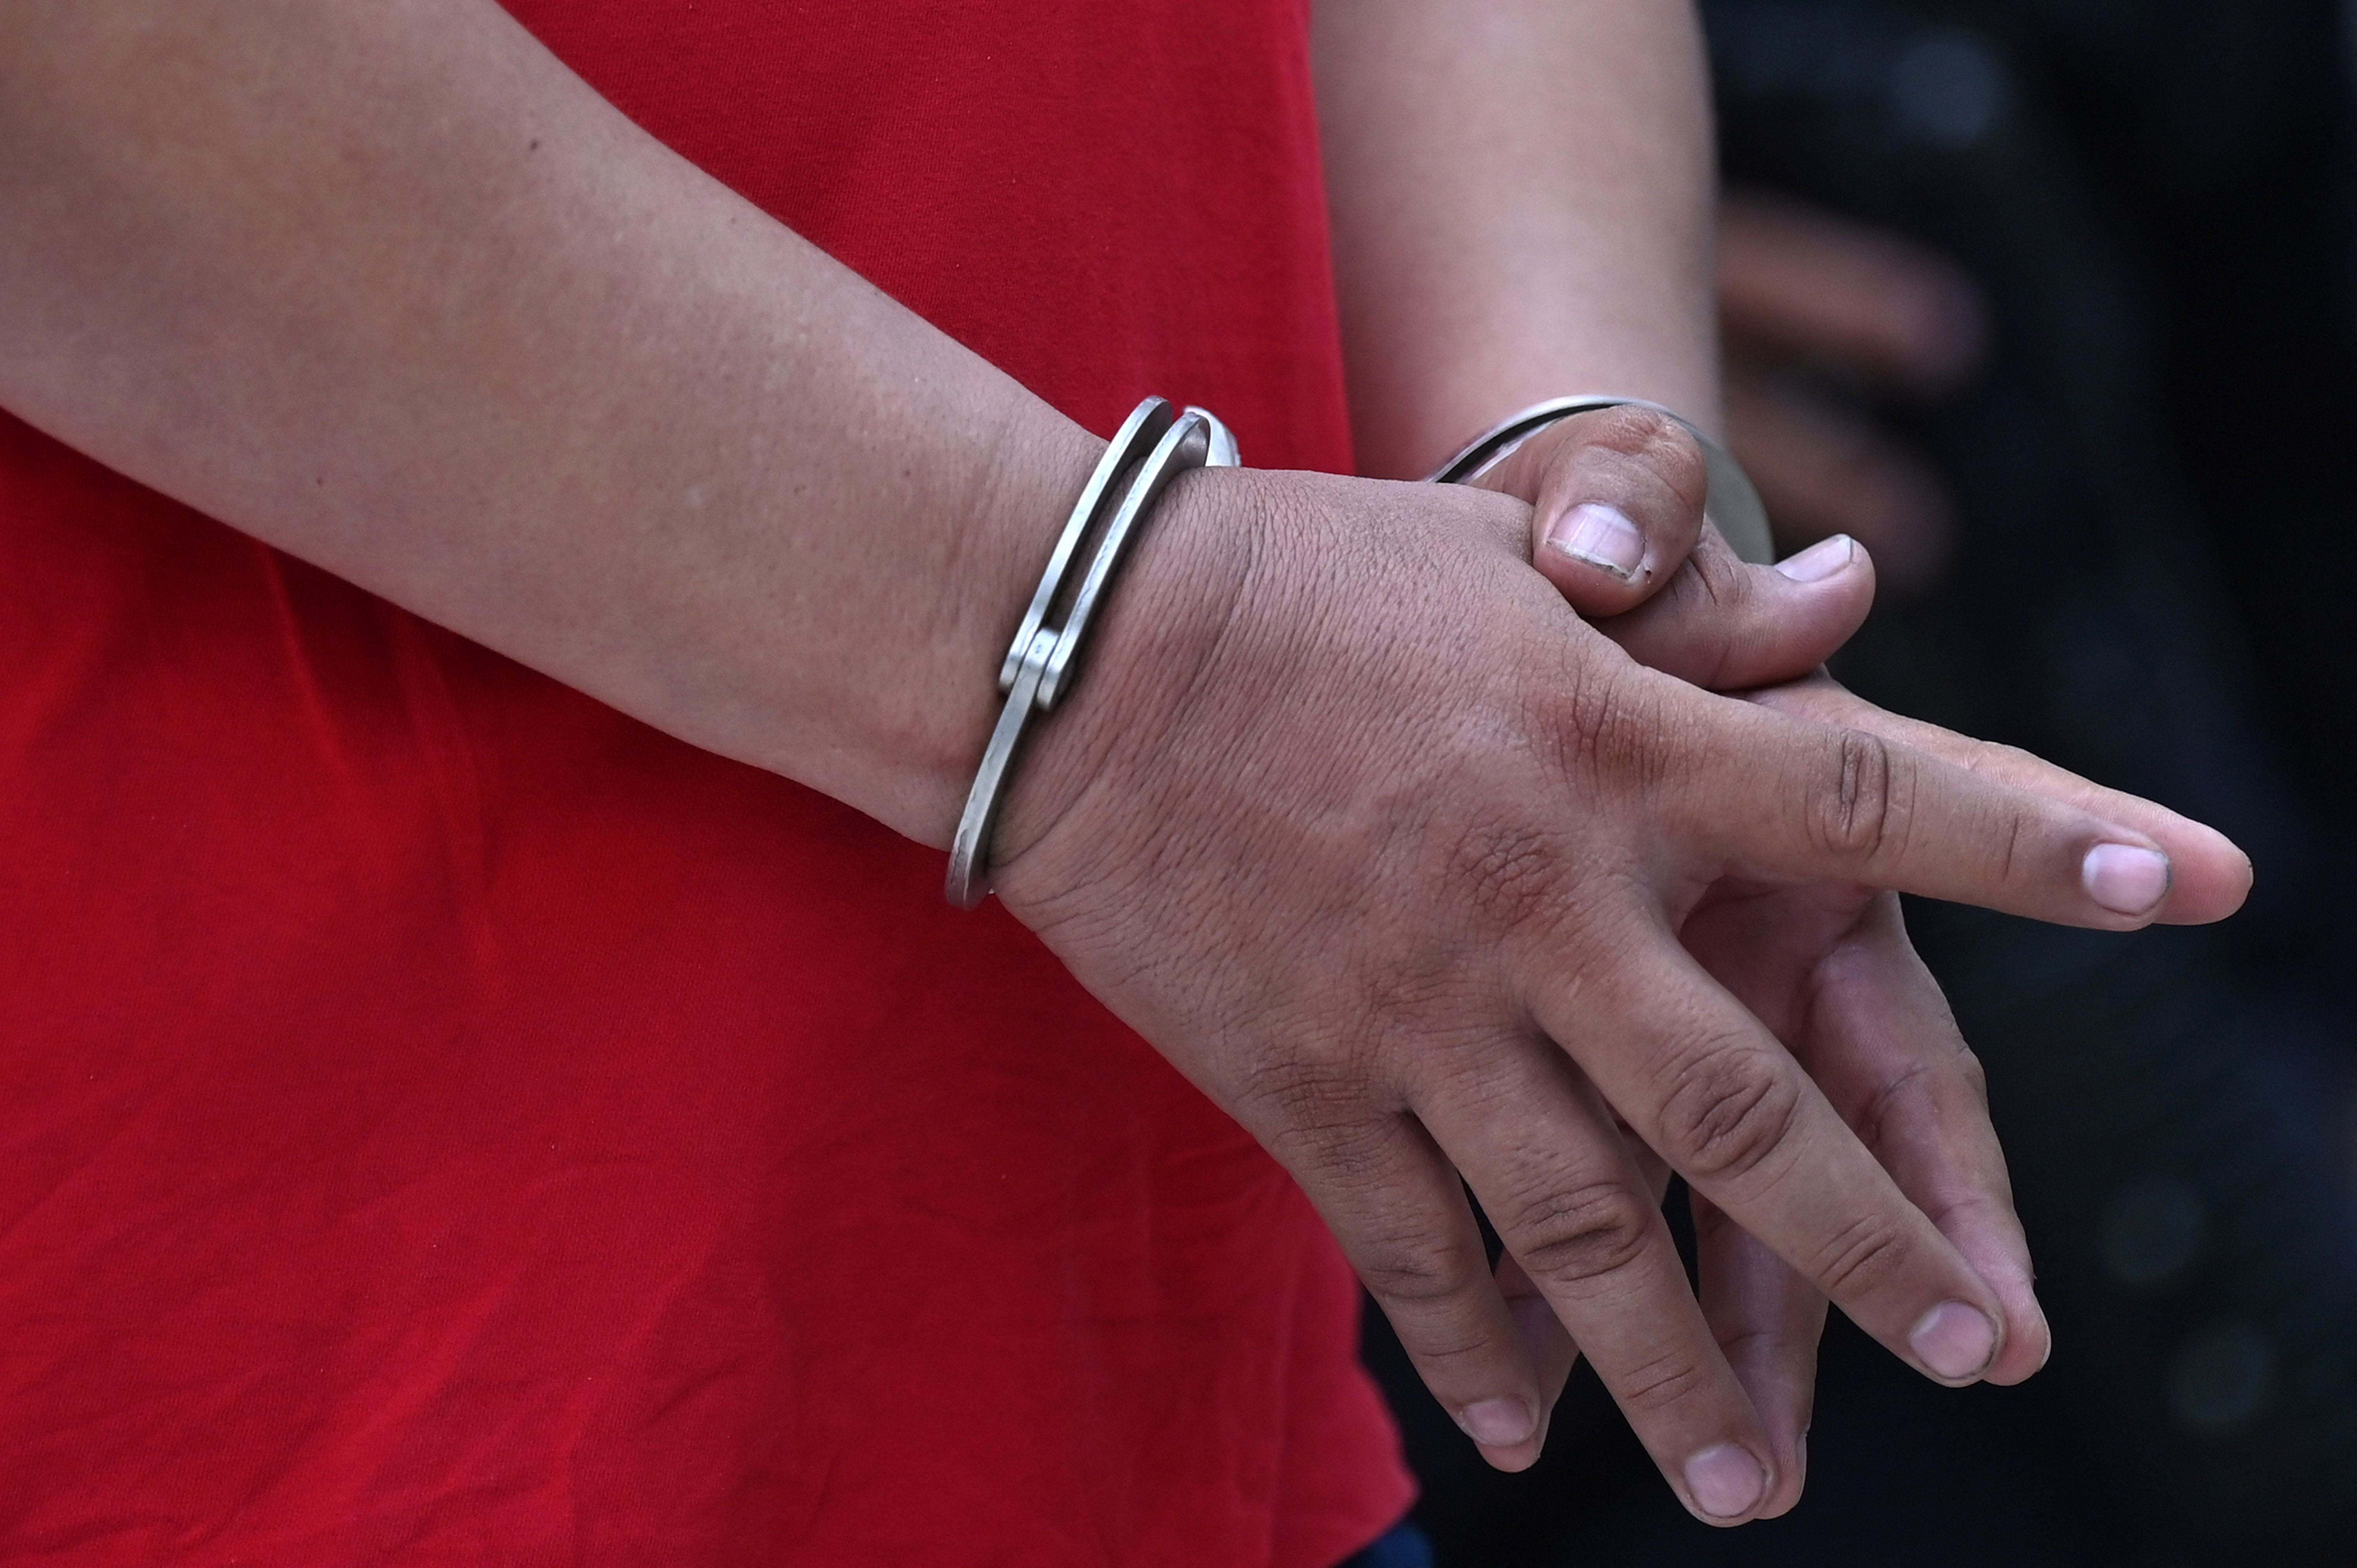 Representational Image: A Hispanic man in Birmingham, Alabama has sued the police for handcuffing hims so tightly that his hand hand to be amputated